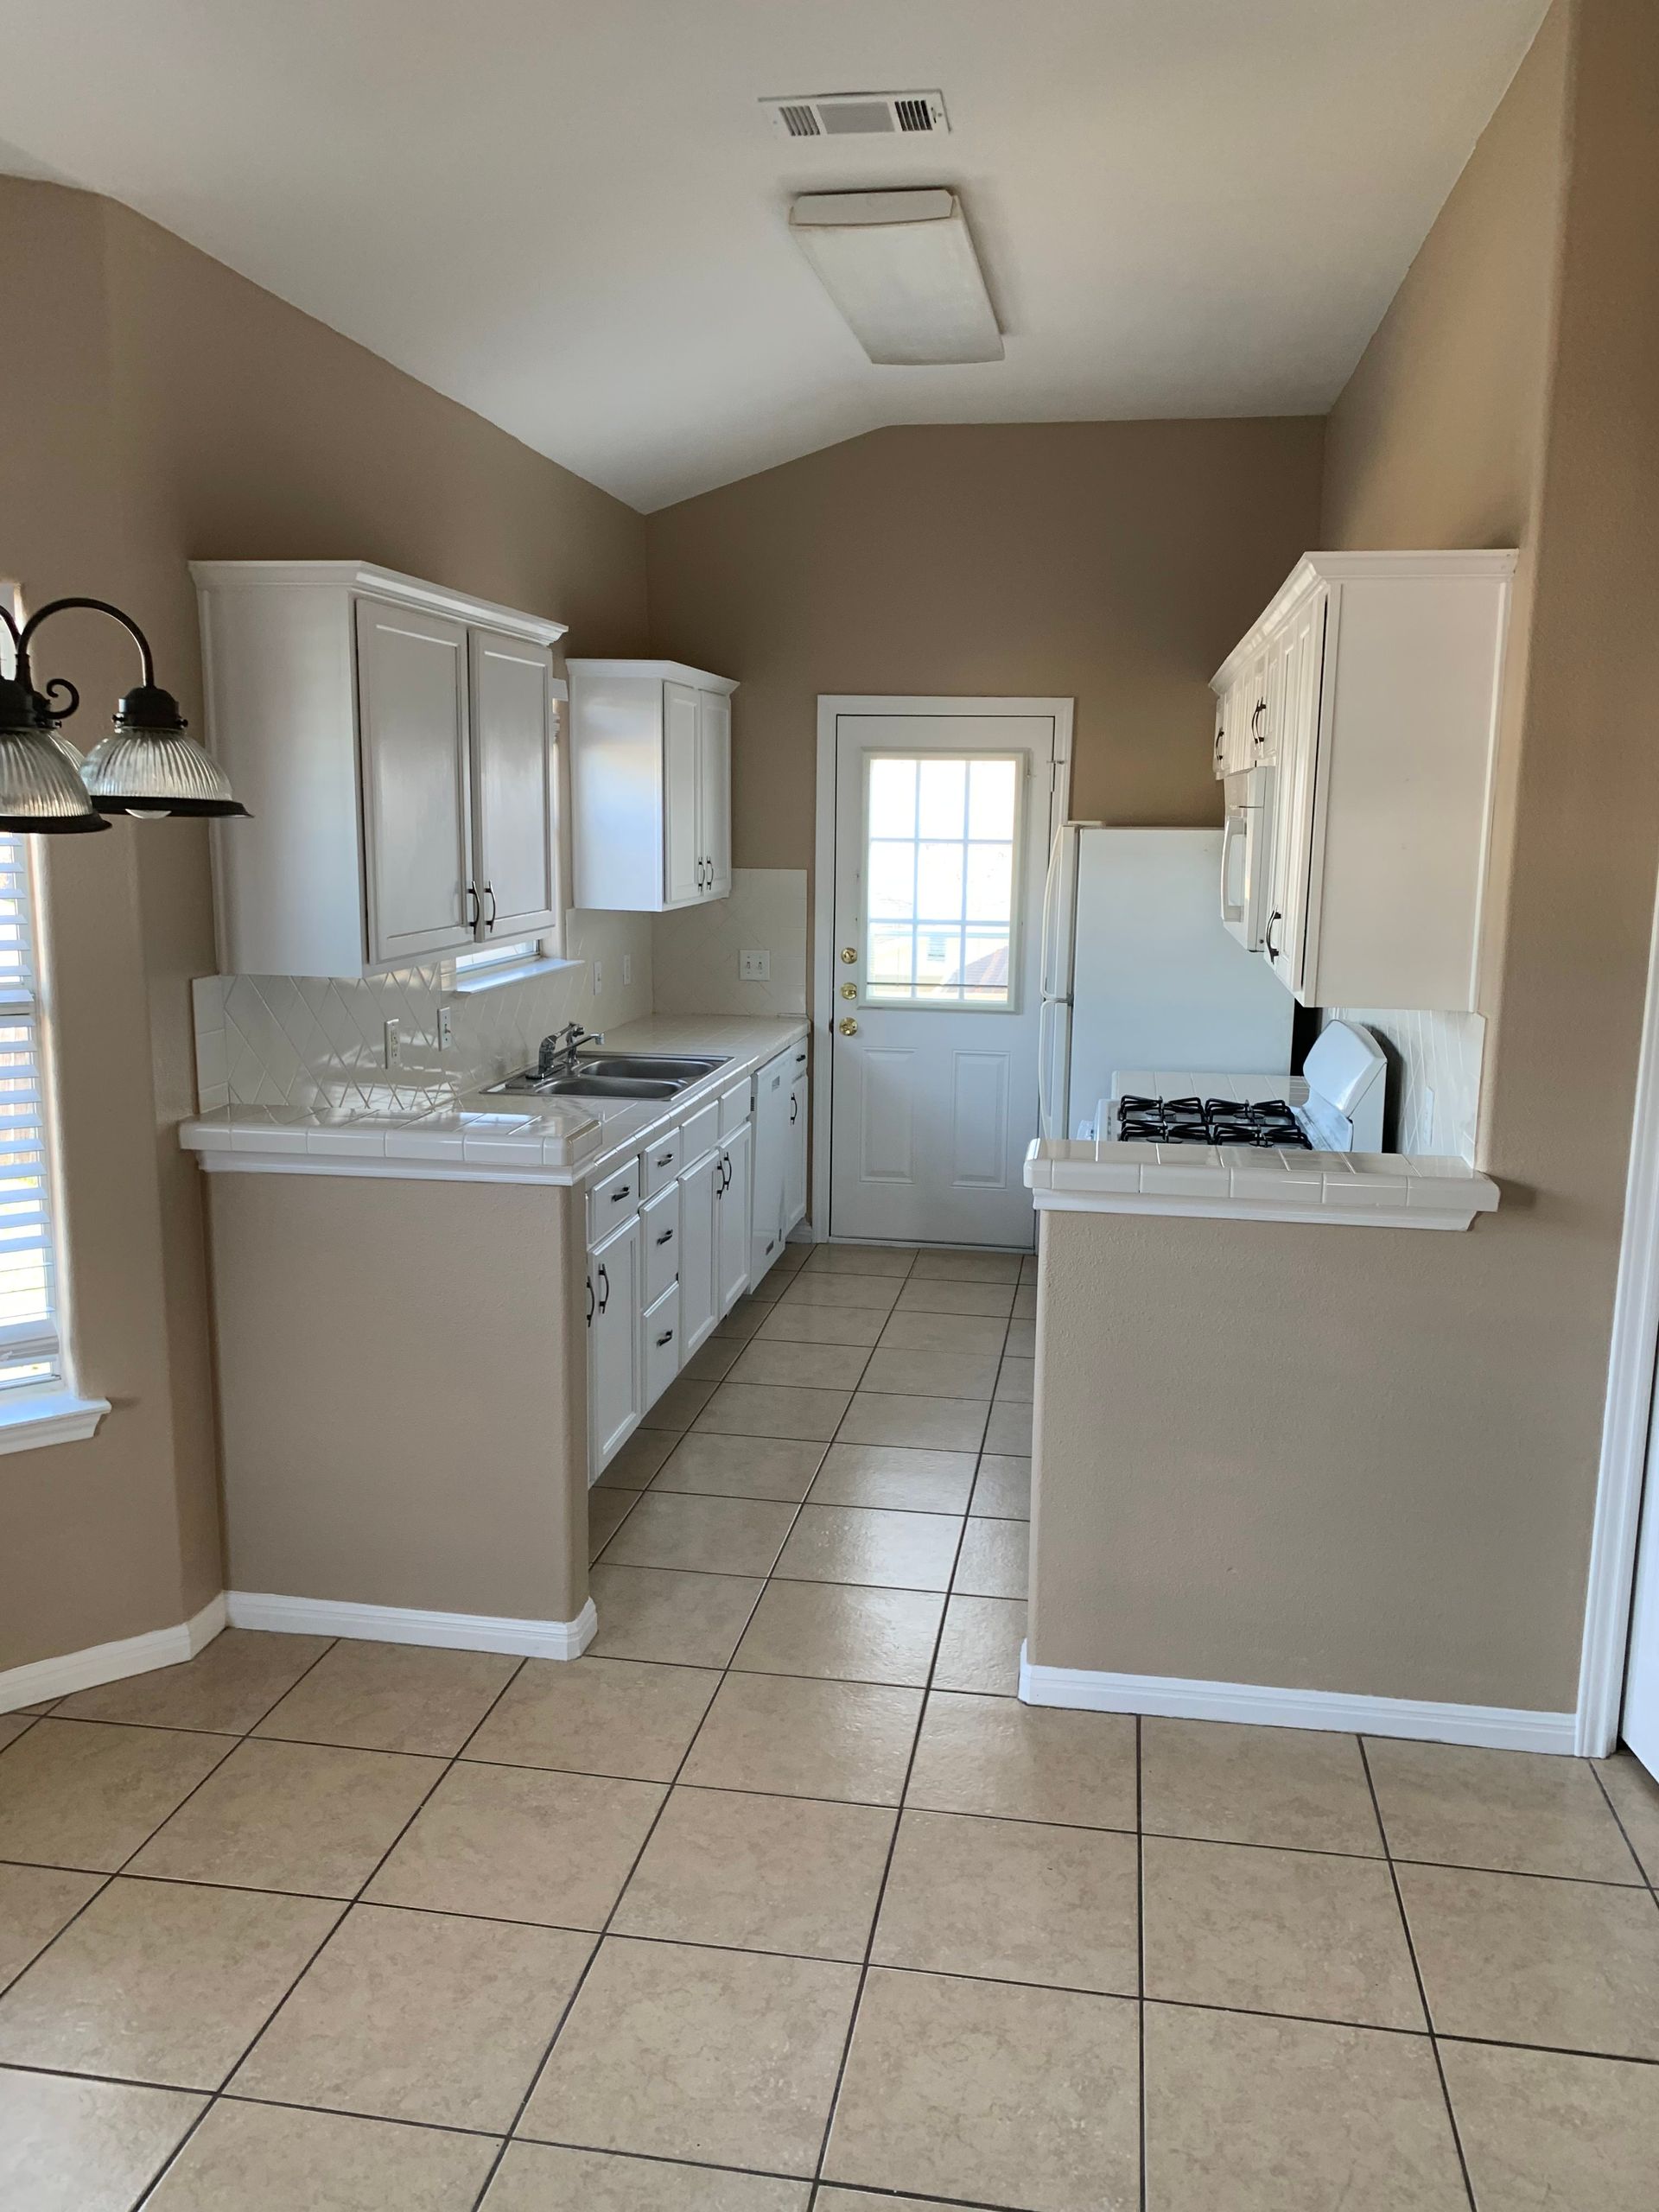 An image showcasing a kitchen remodeling project in progress. Skilled contractors are seen installing new cabinets, countertops, and appliances, transforming the kitchen into a modern and stylish space.